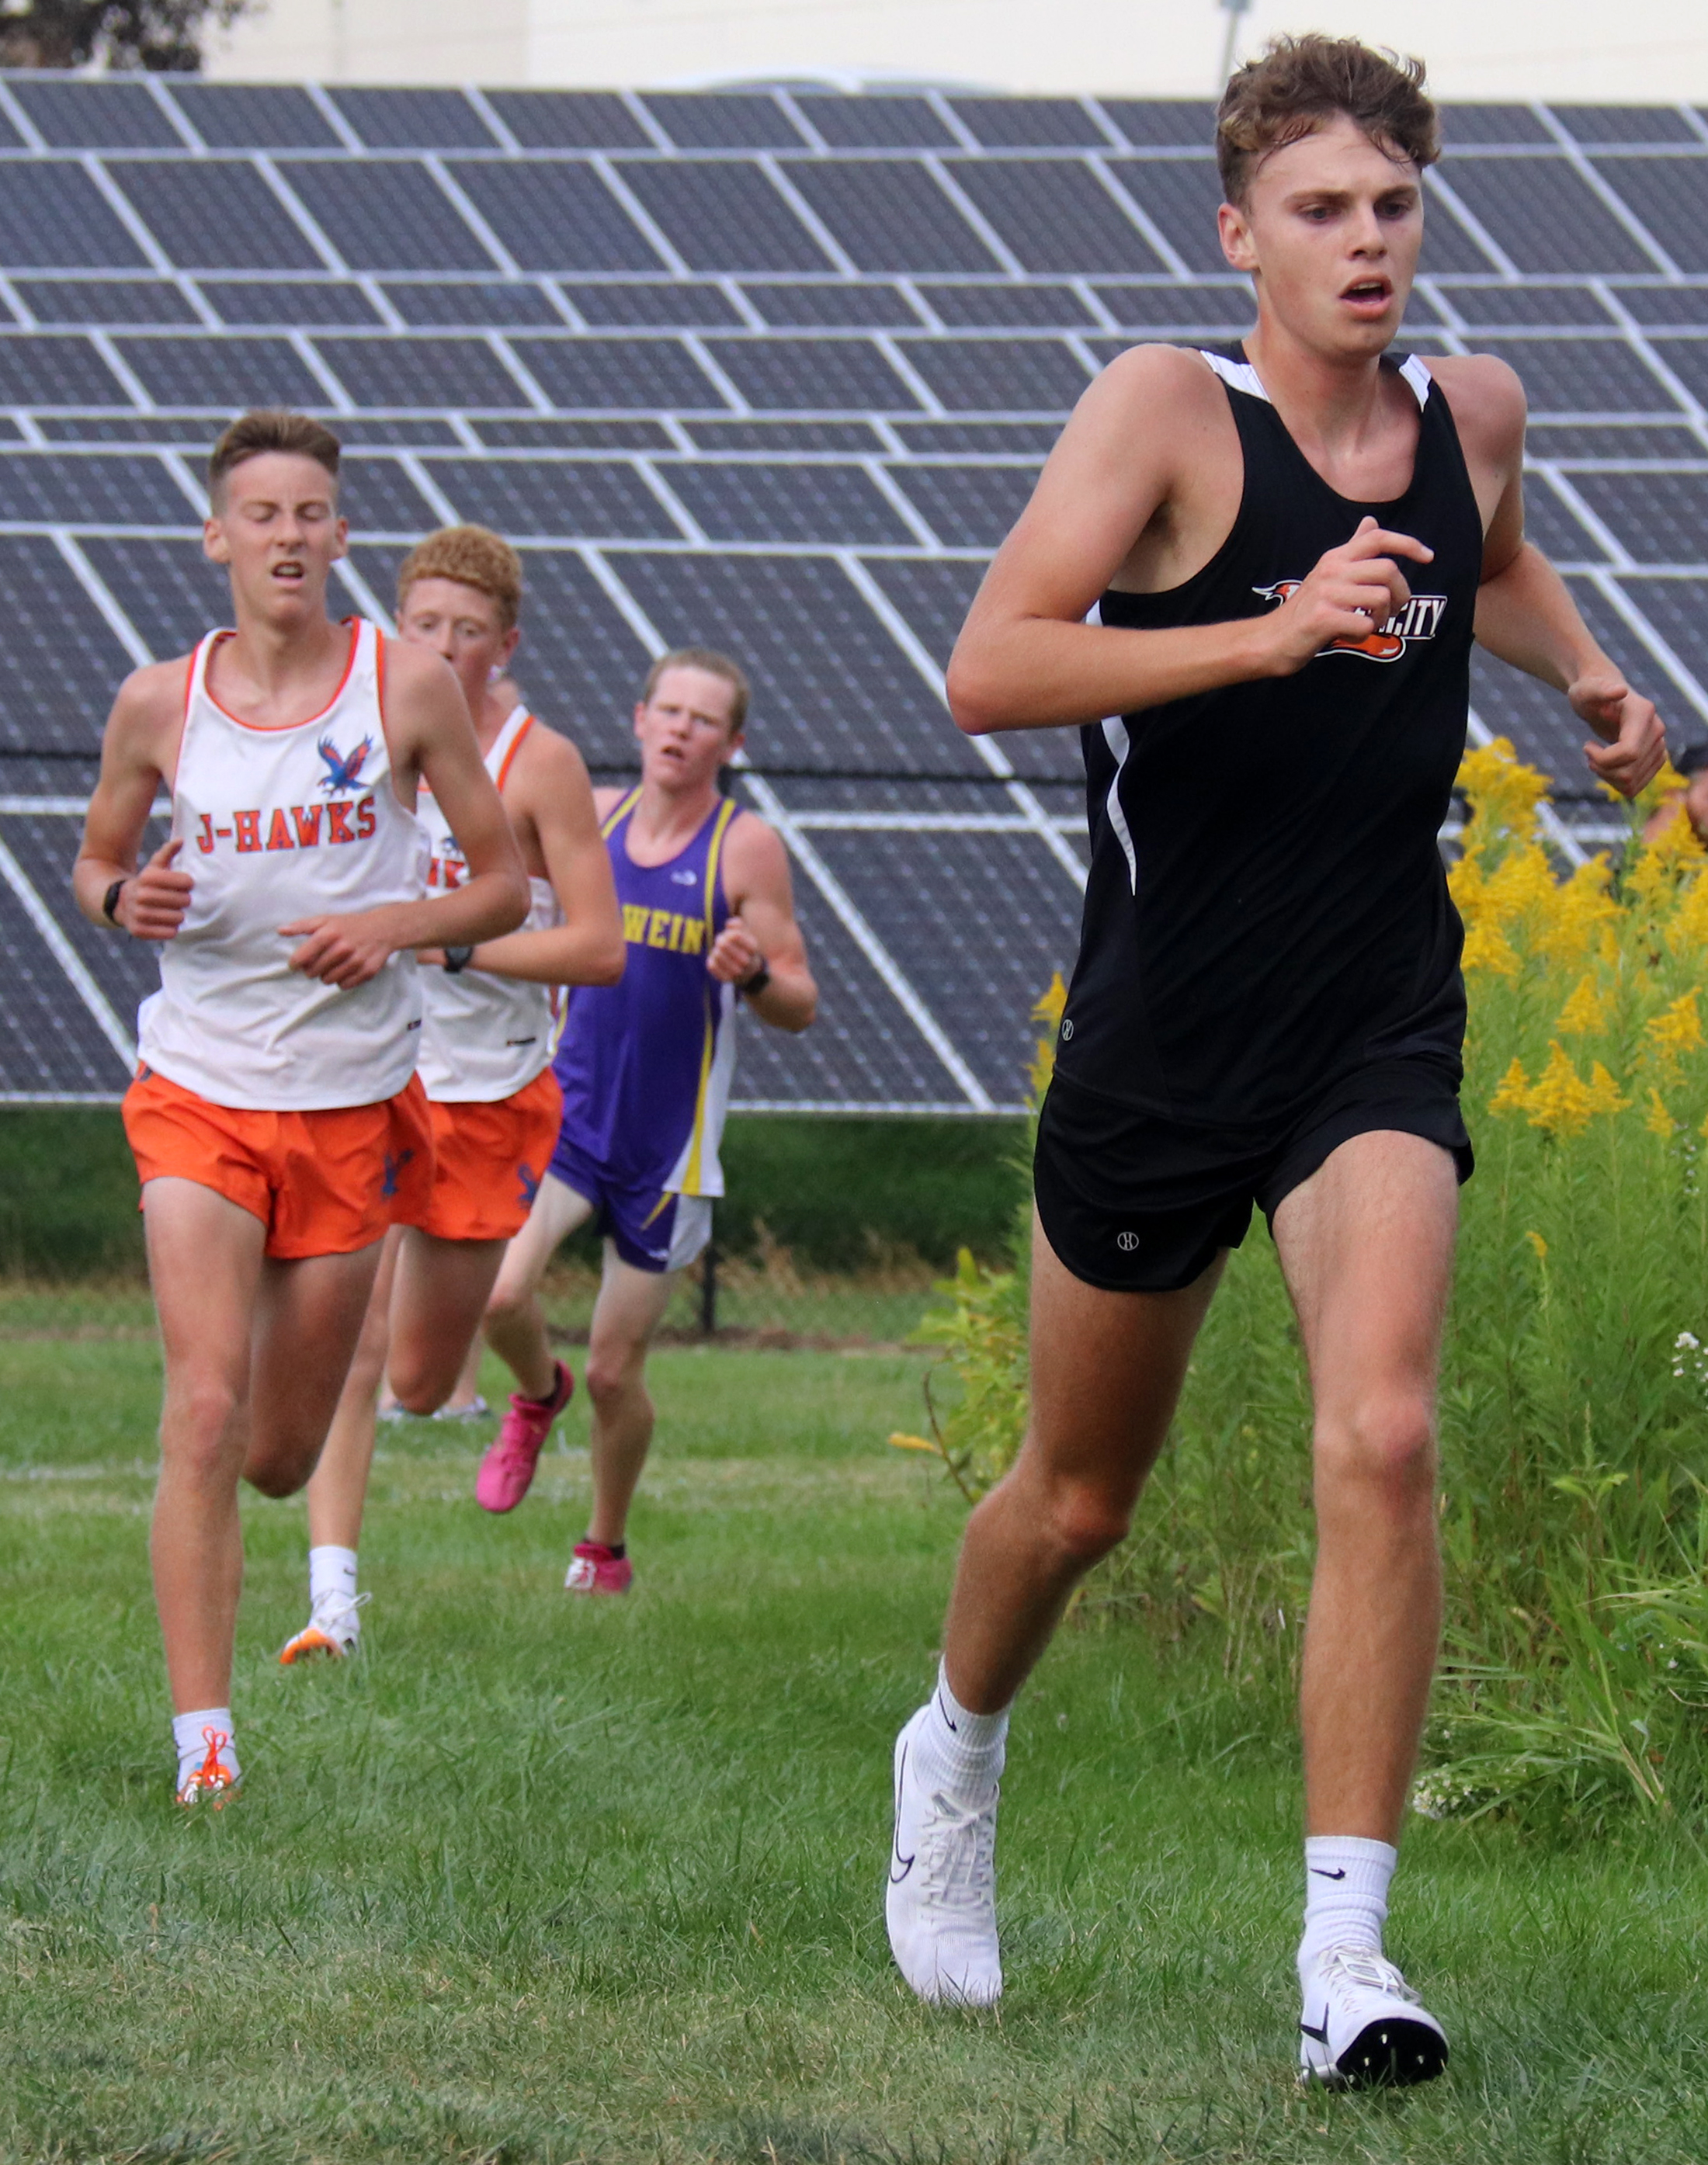 Nick Williams paces Comet boys to Central XC Invite title